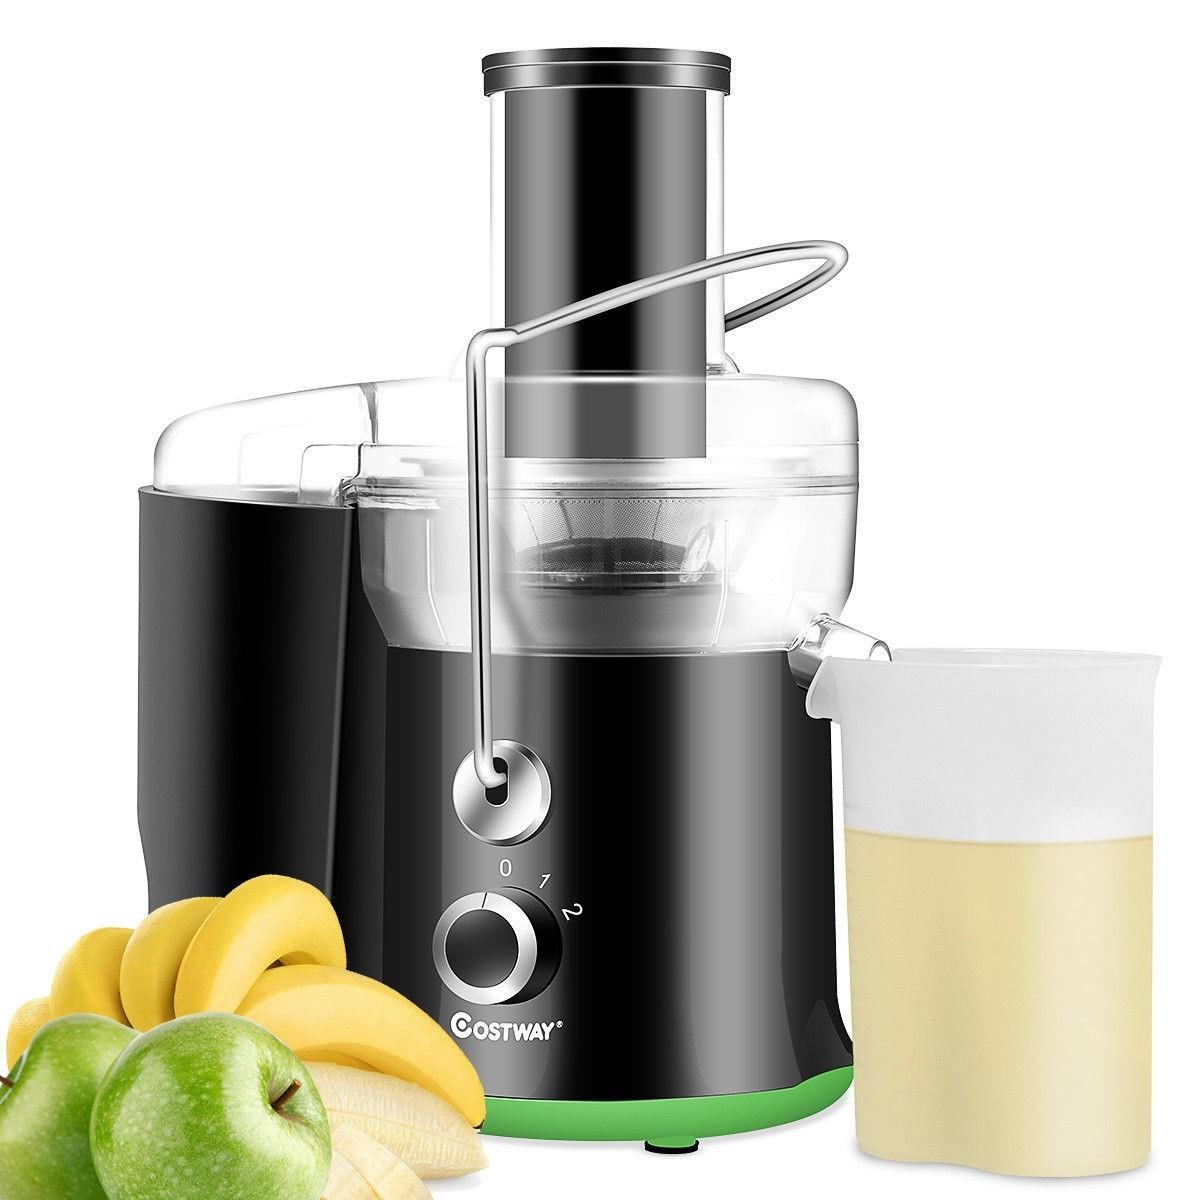 Picture of Total Tactic EP23783US 2 Speed Wide Mouth Fruit & Vegetable Centrifugal Electric Juicer - Black & Green